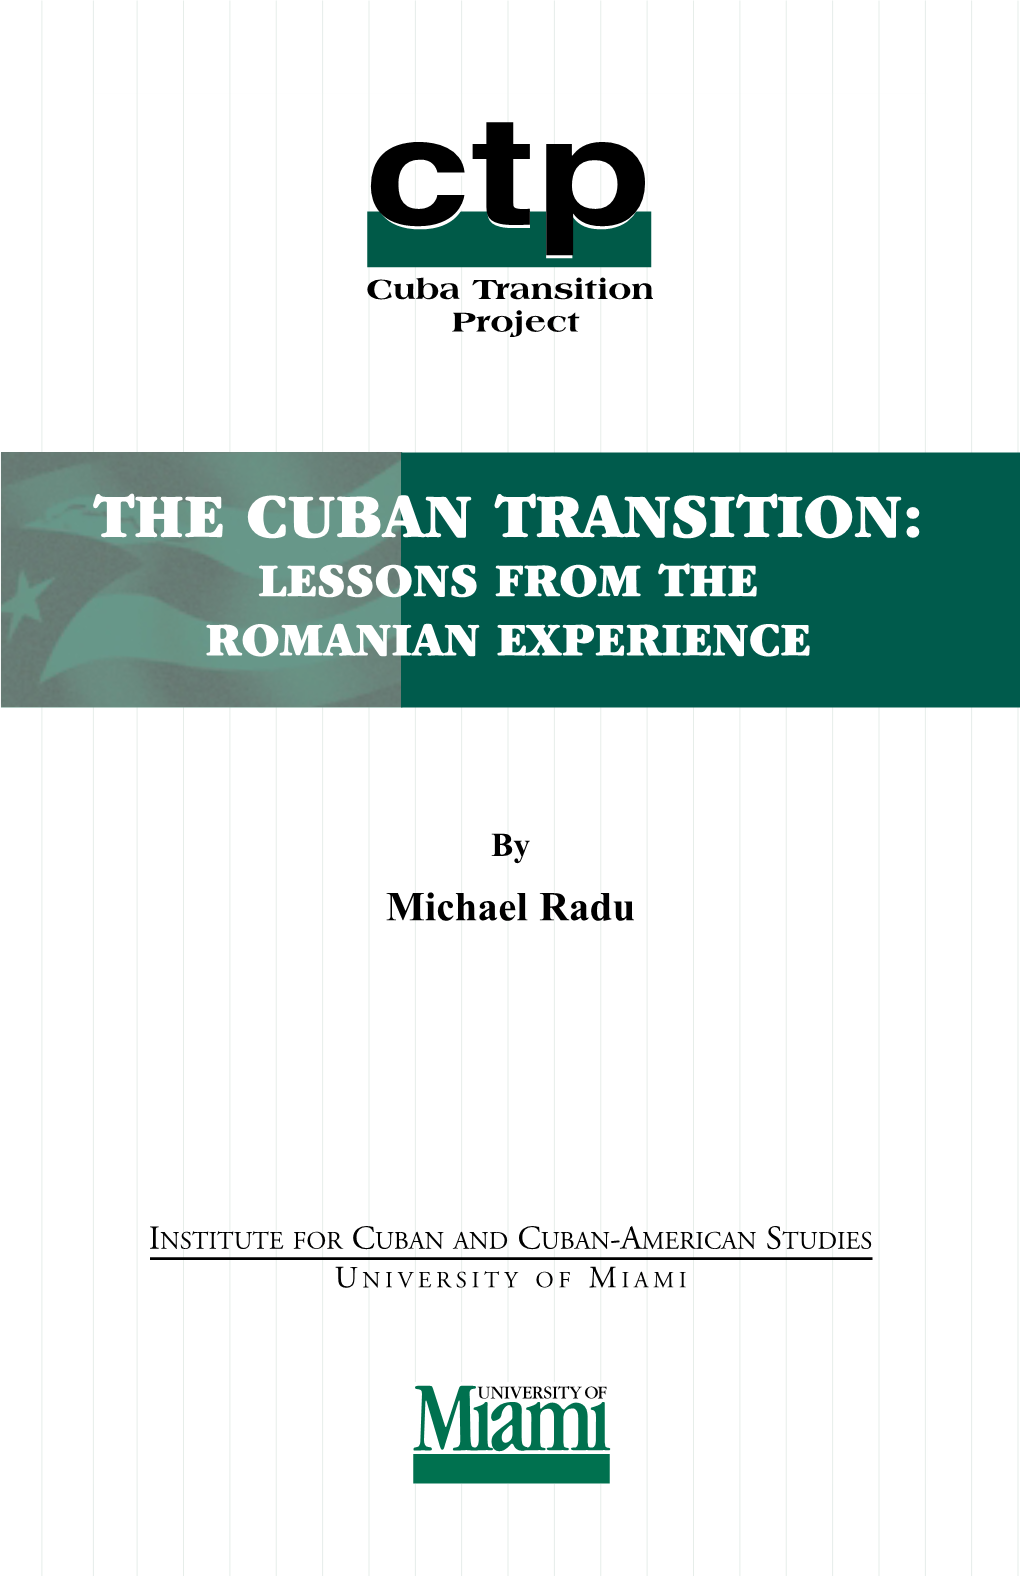 The Cuban Transition: Lessons from the Romanian Experience